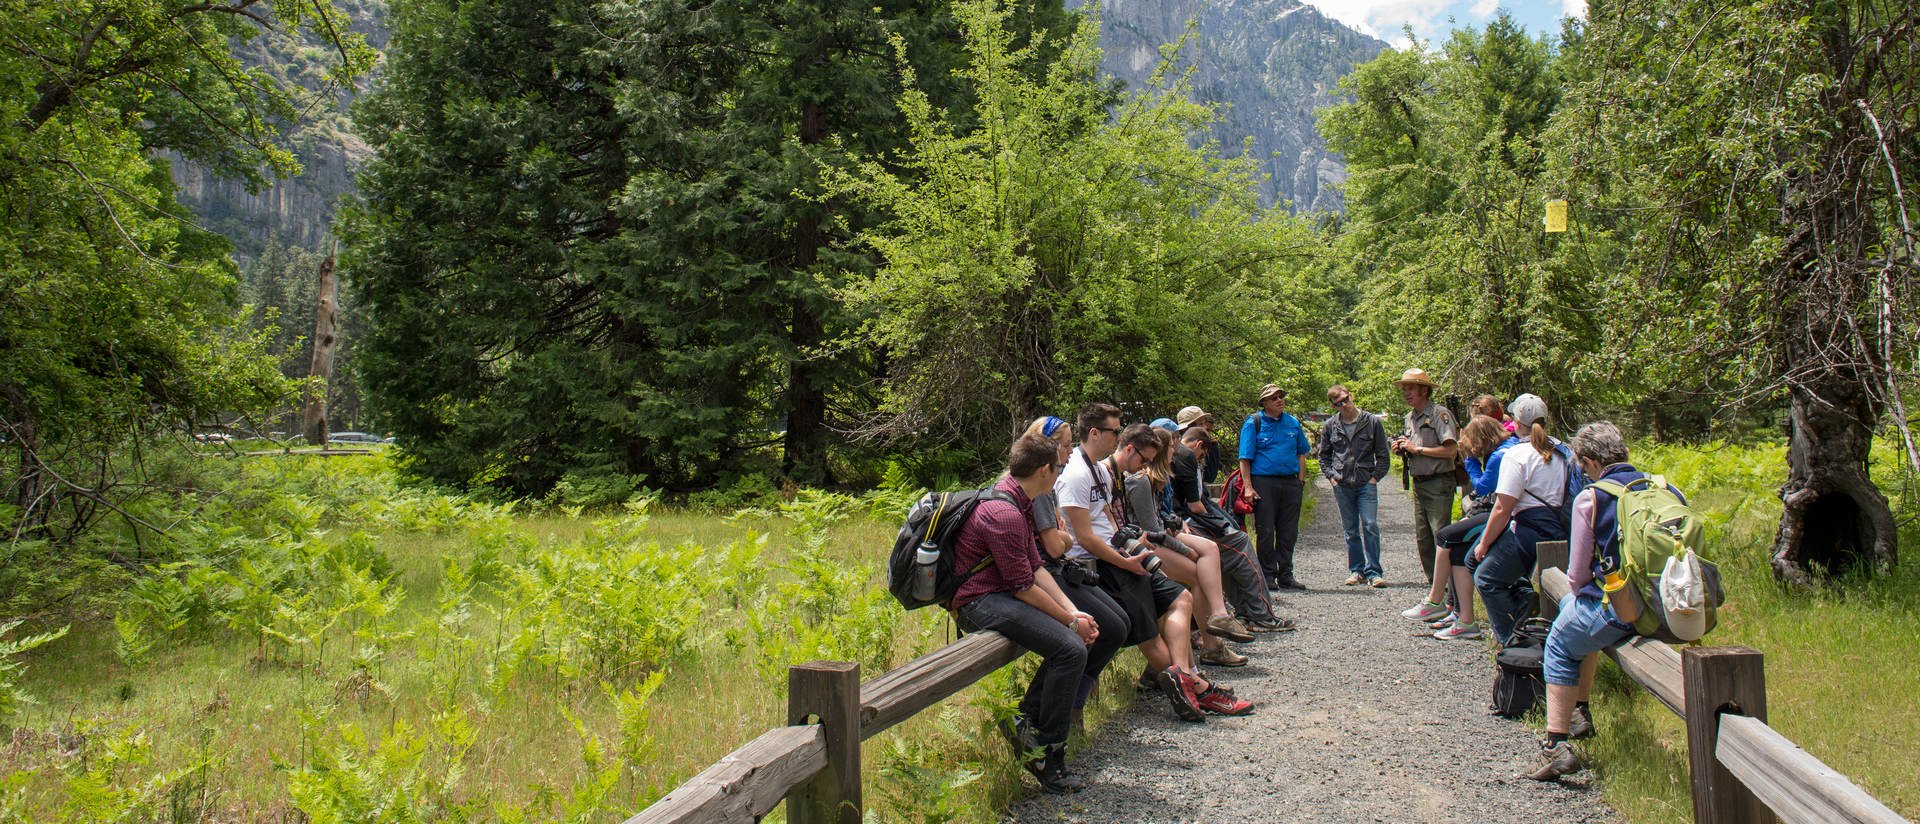 Group of Blugolds at Yosemite National Park.